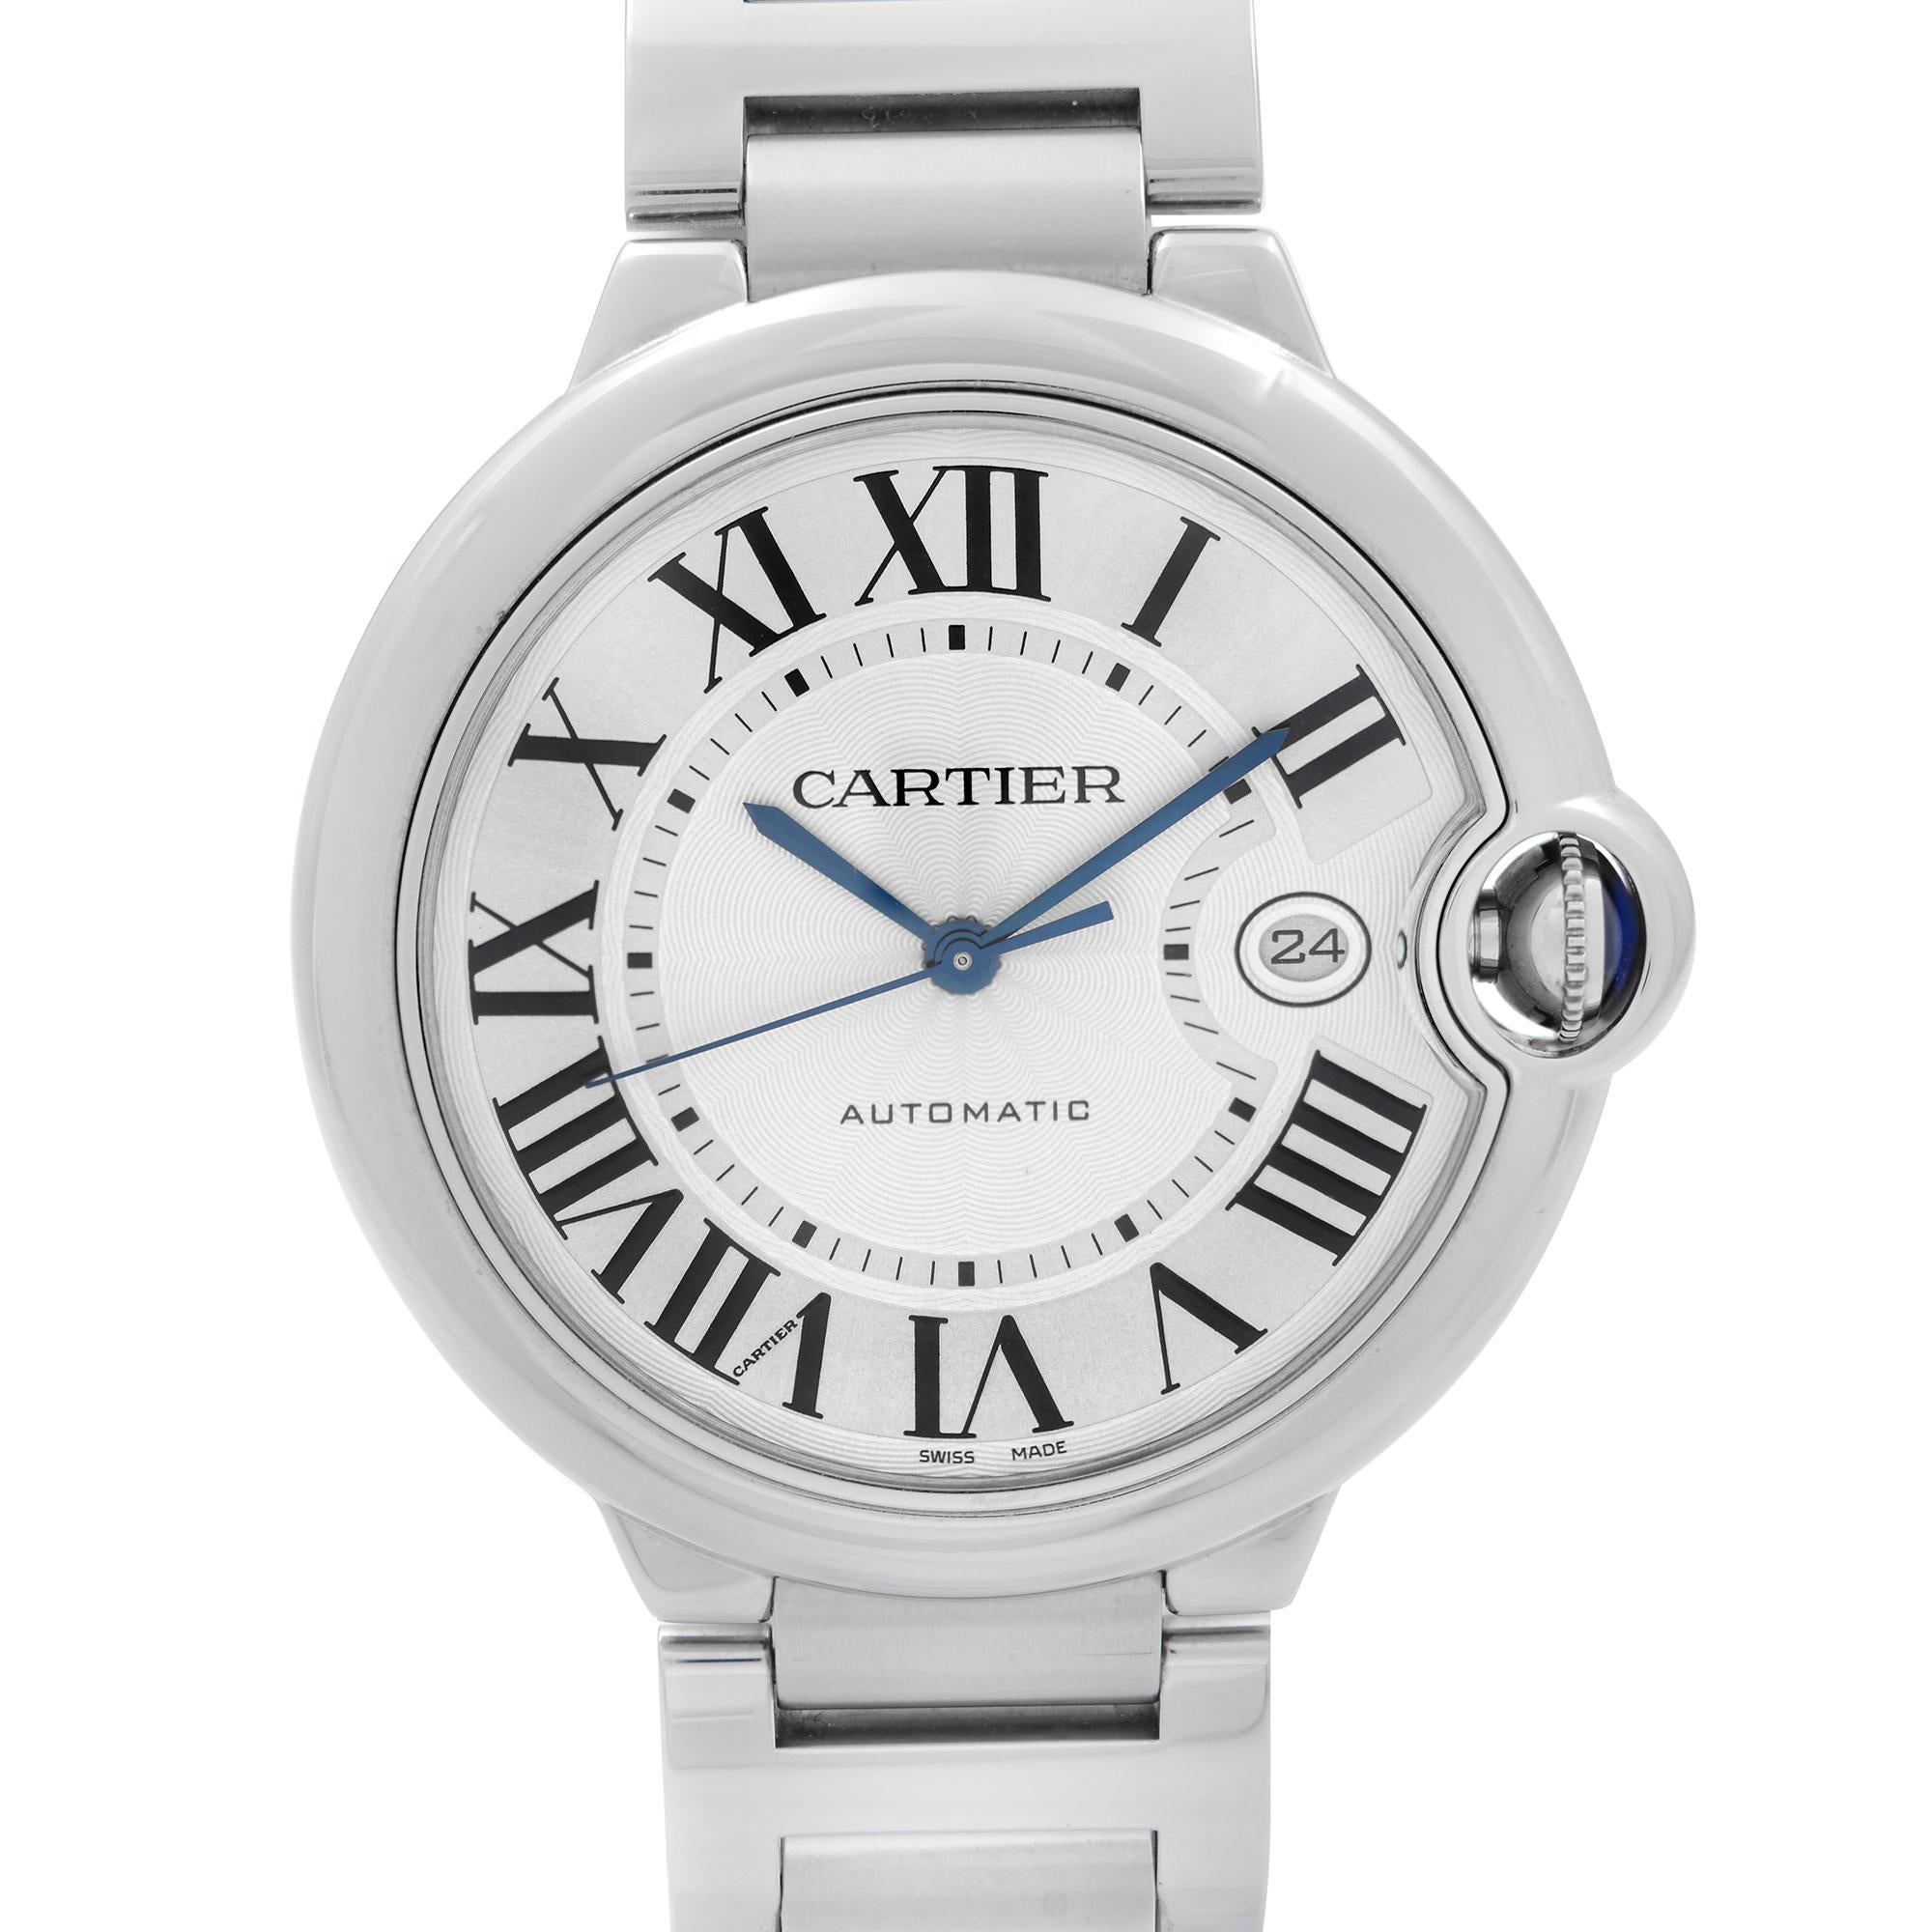 Case reference 3765. Pre-Owned Cartier Ballon Bleu 42mm Stainless Steel Silver Dial Men's Automatic Watch W69012Z4. This Beautiful Timepiece Features: Stainless Steel Case and Bracelet. Steel Crown set with a blue spinel cabochon. Fixed Steel Bezel,